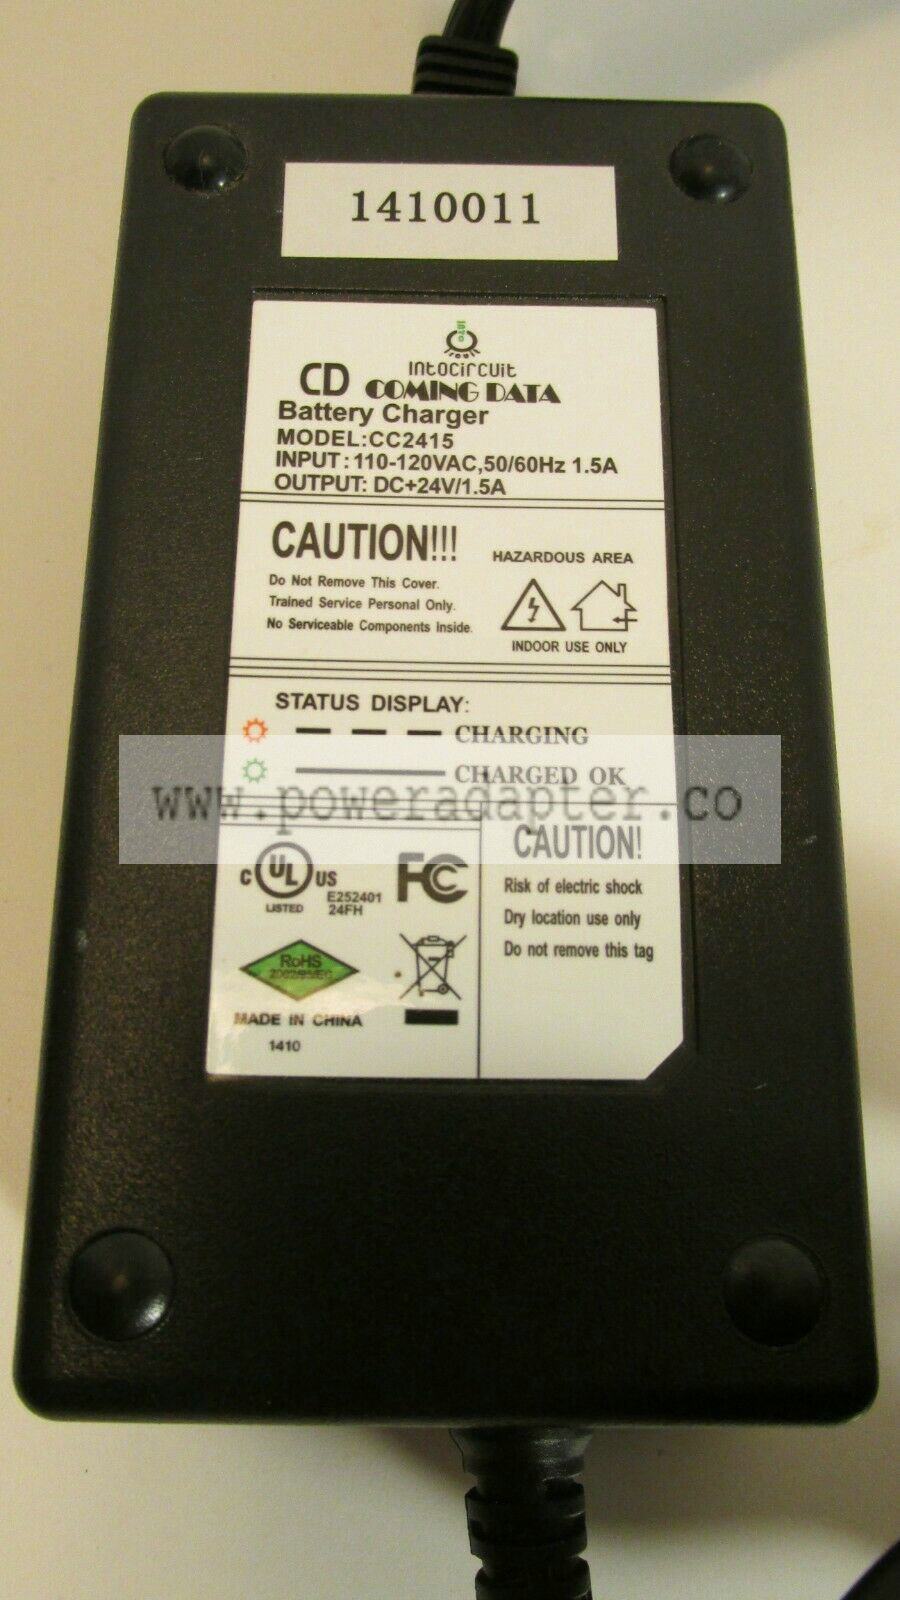 Intocircuit CC2415 Power Supply AC Adapter Charger DC 24V 1.5A TESTED FREE SHIP Brand: Intocircuit Output Voltage: 2